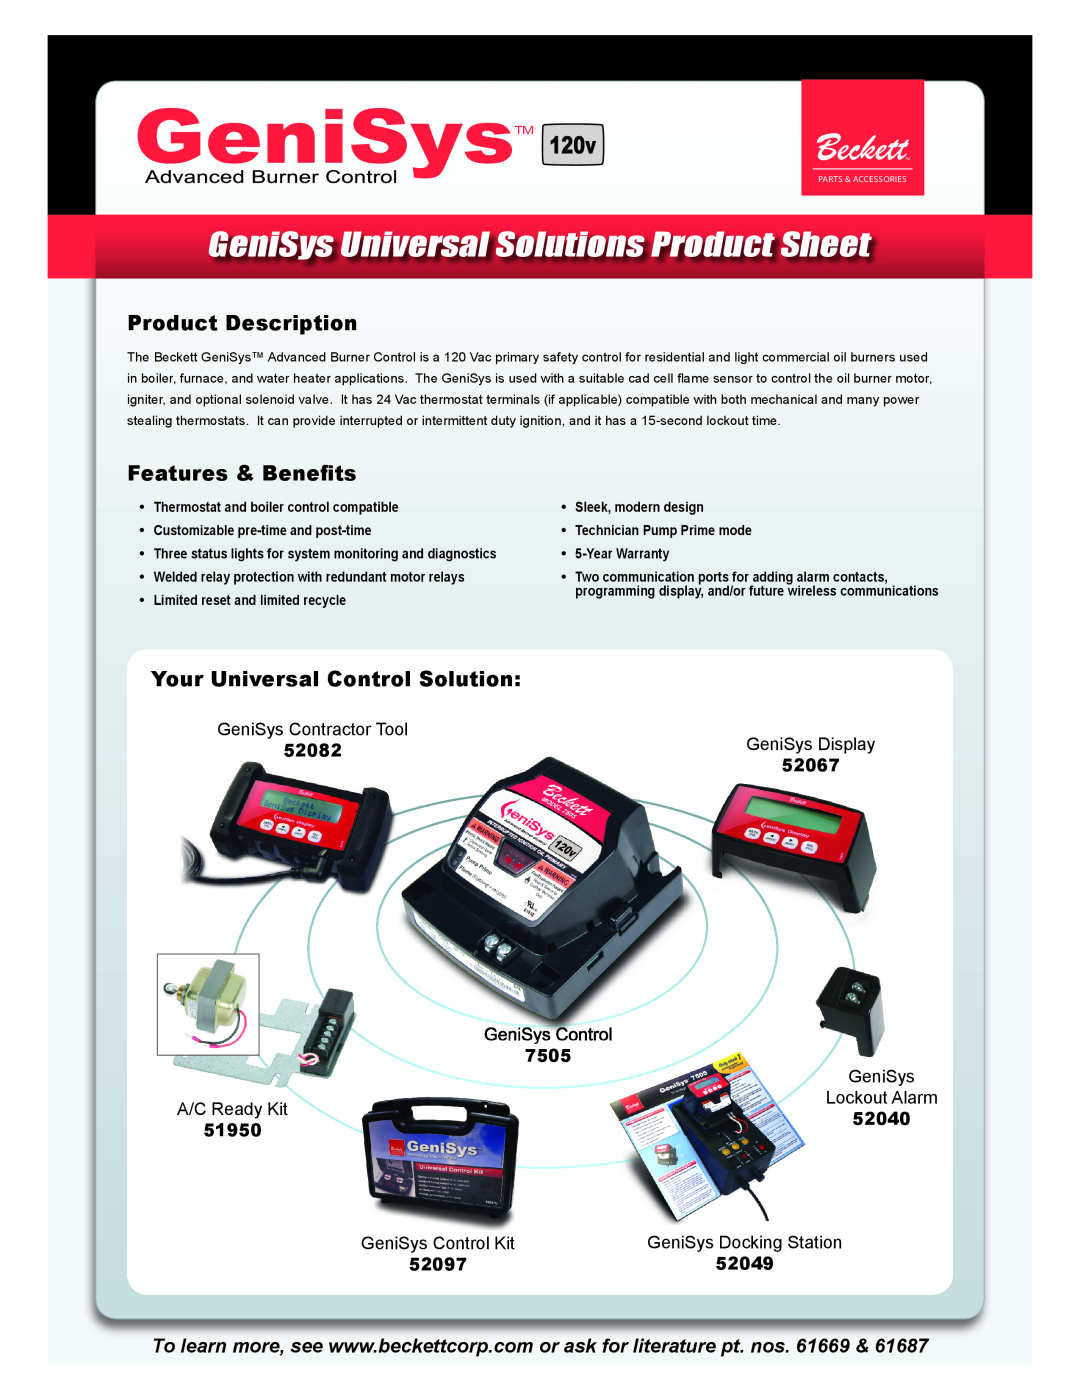 Beckett 52040 warranty Product Description, Features & Beneﬁts, Your Universal Control Solution, 52067, GeniSys Control 